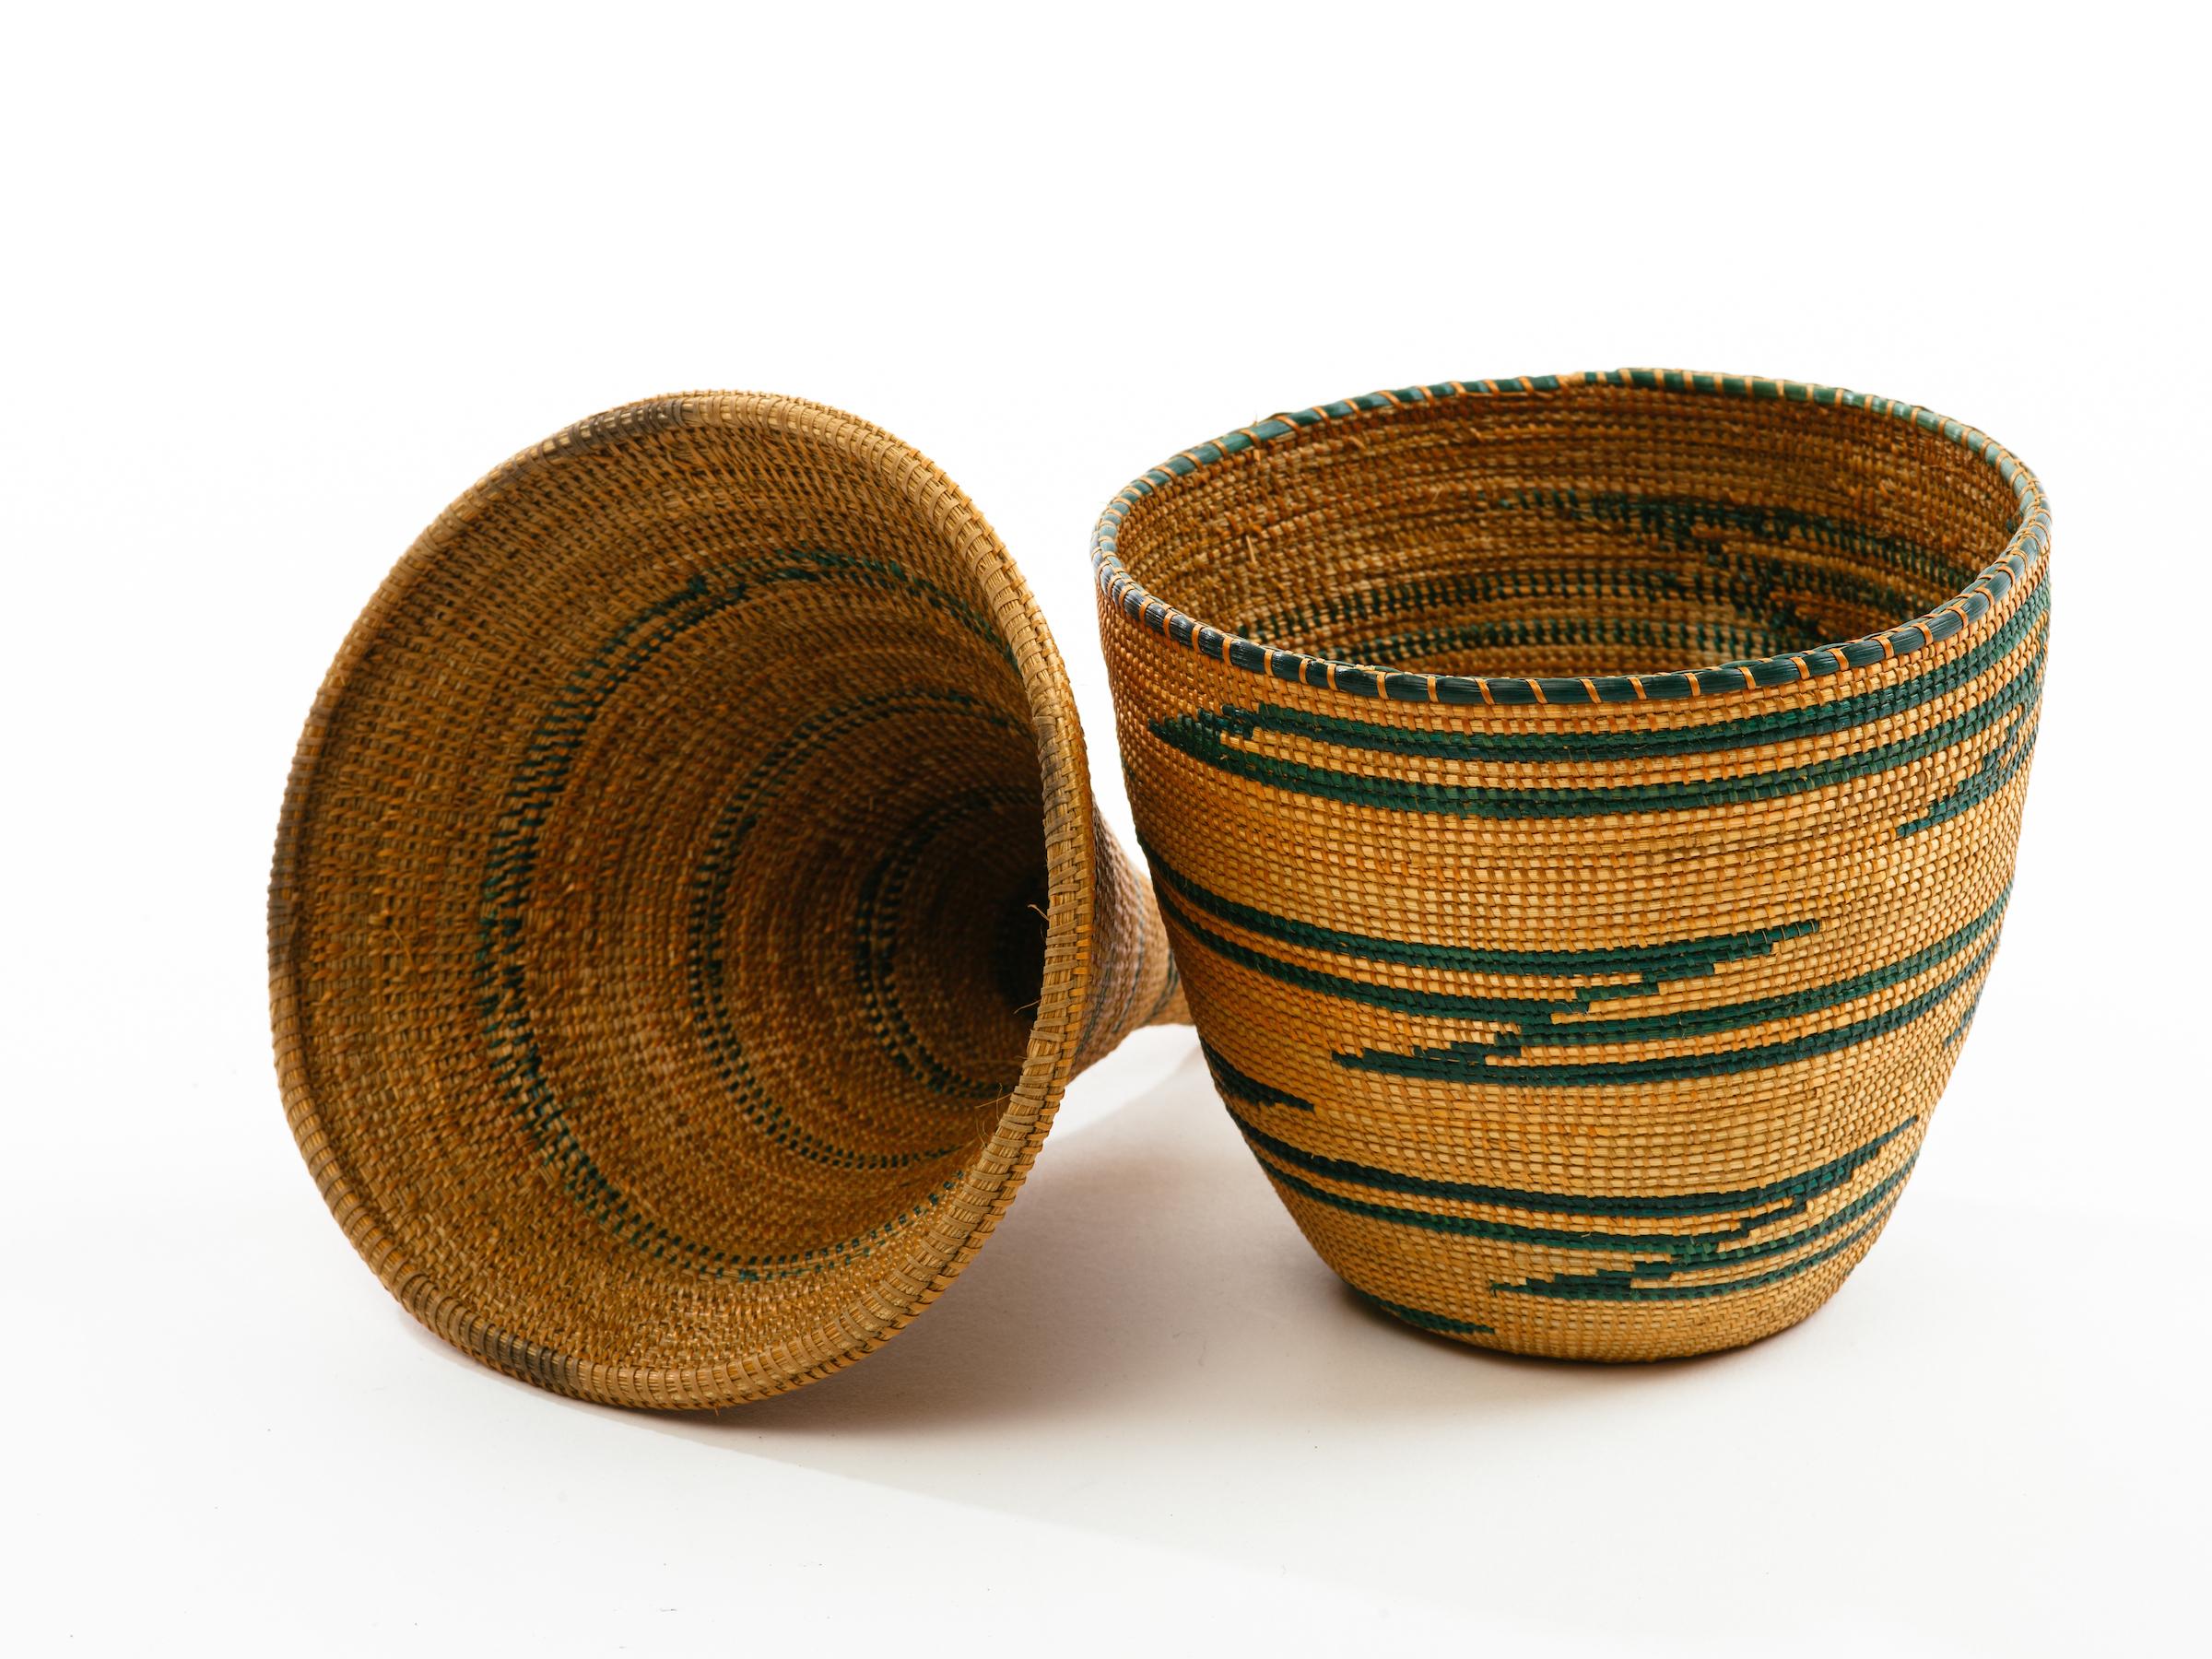 Traditional Tutsi tribal presentation basket with conical lid. Finely woven of natural grasses, circa early to mid-20th century, Rwanda.